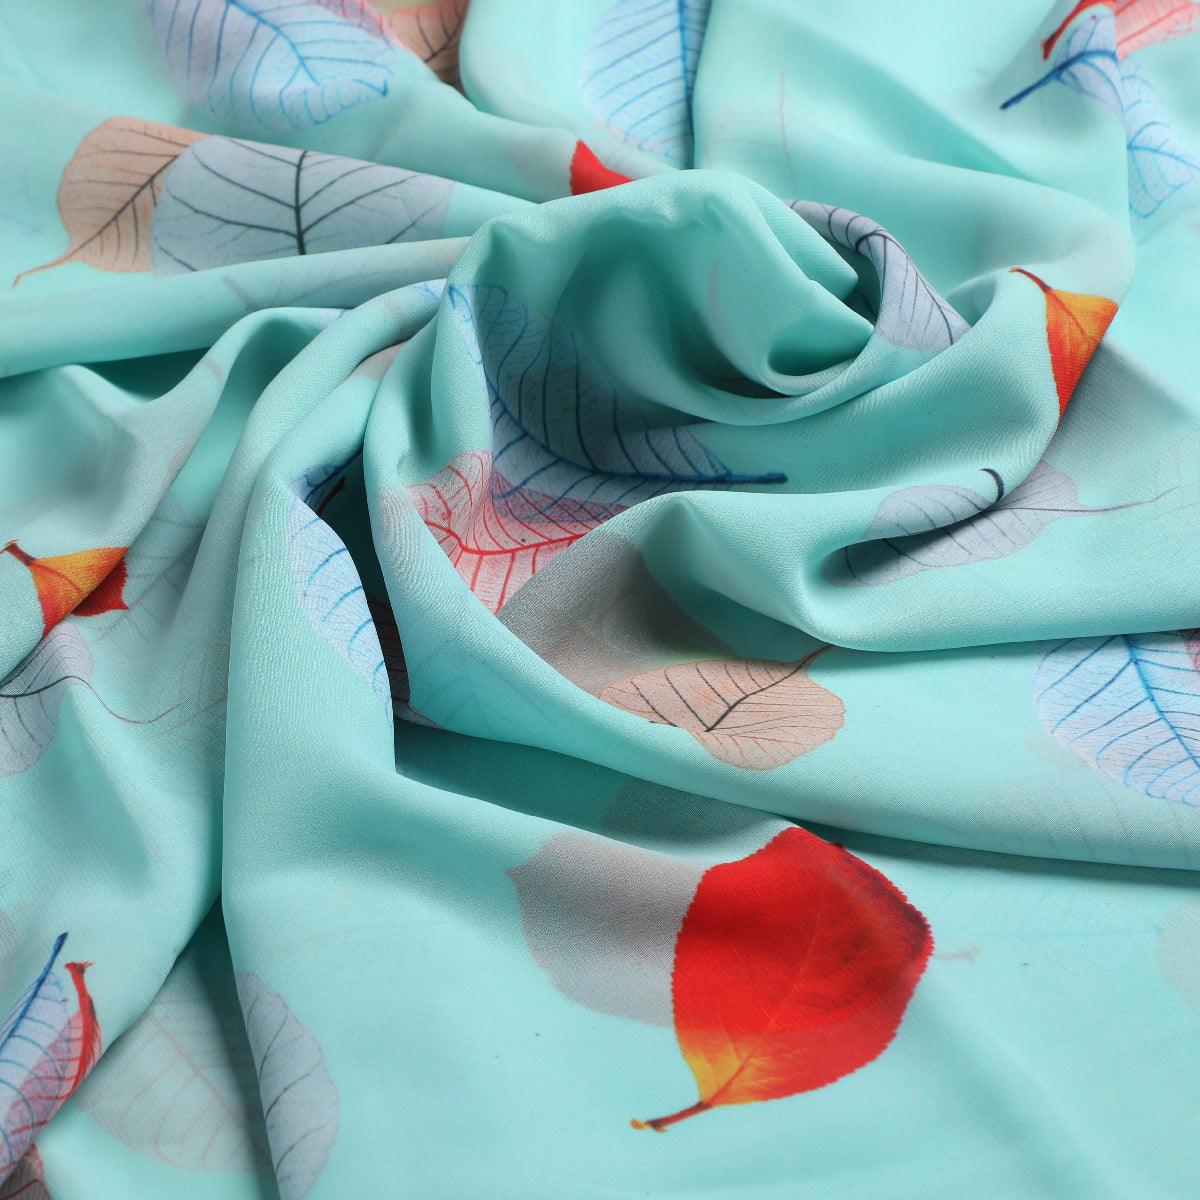 Faint Clover Leaves Weightless Printed Fabric - FAB VOGUE Studio®